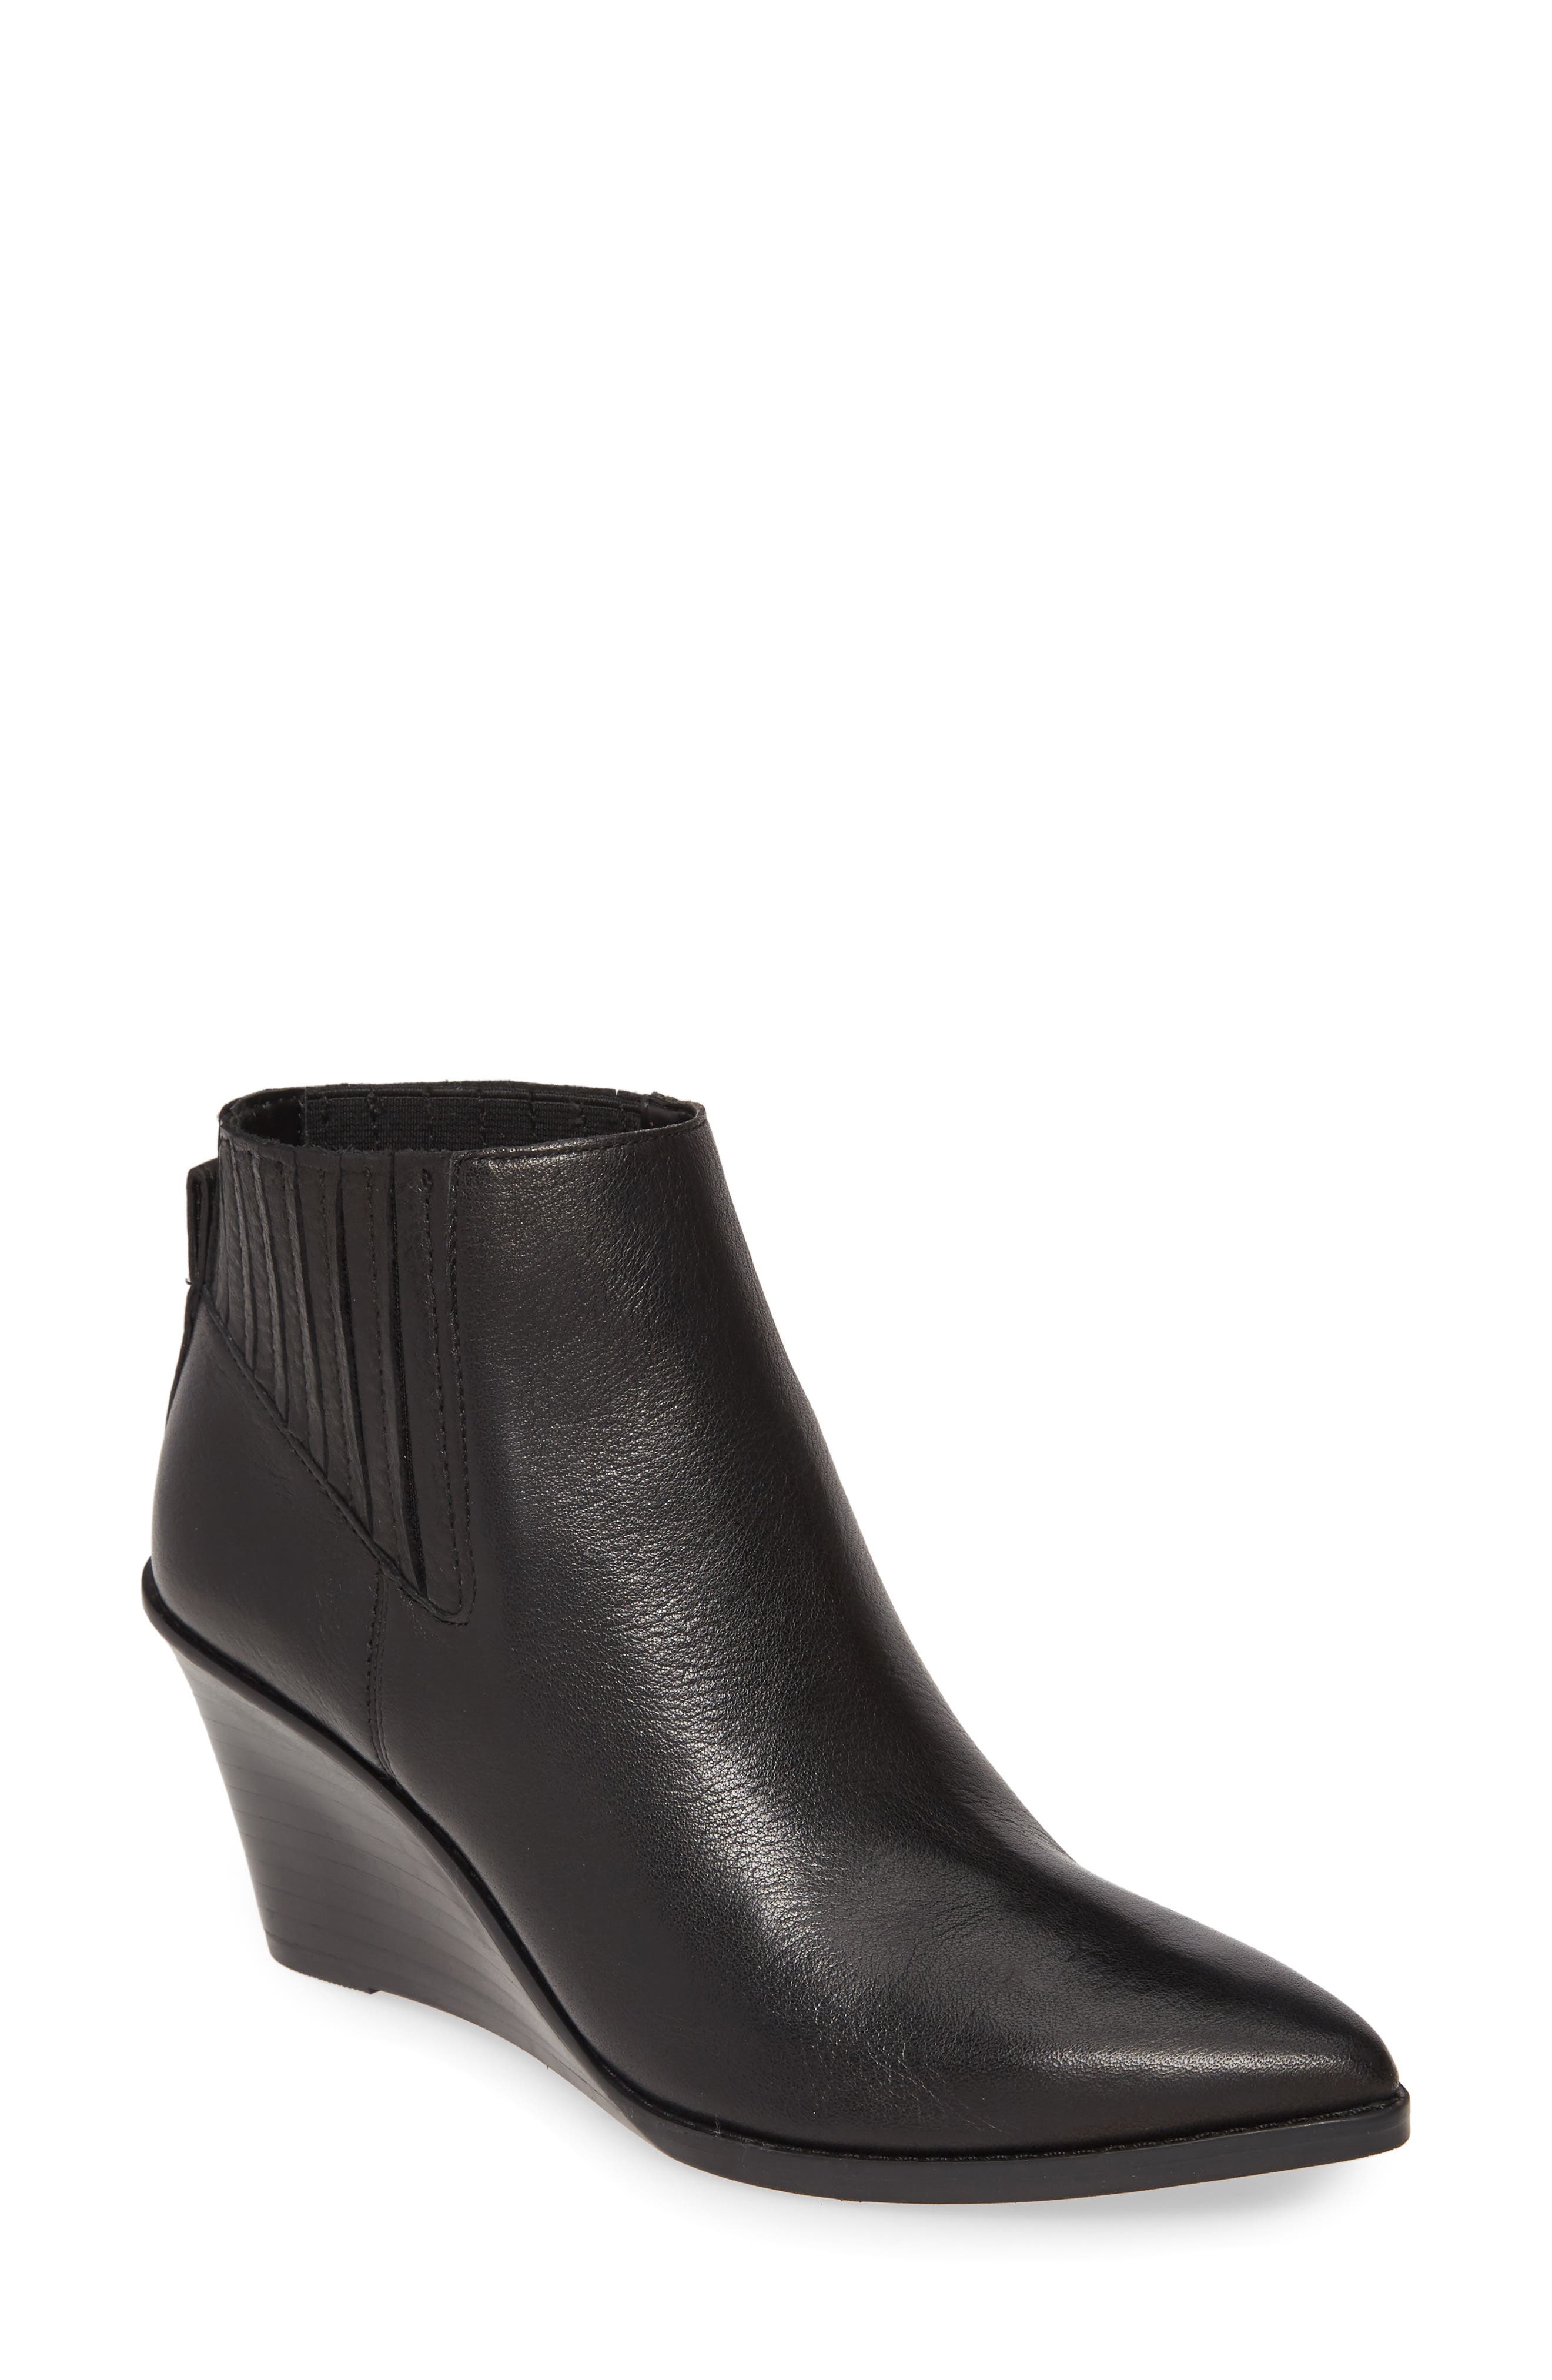 UPC 192675902571 product image for Women's Calvin Klein Tabby Wedge Bootie, Size 10 M - Black | upcitemdb.com